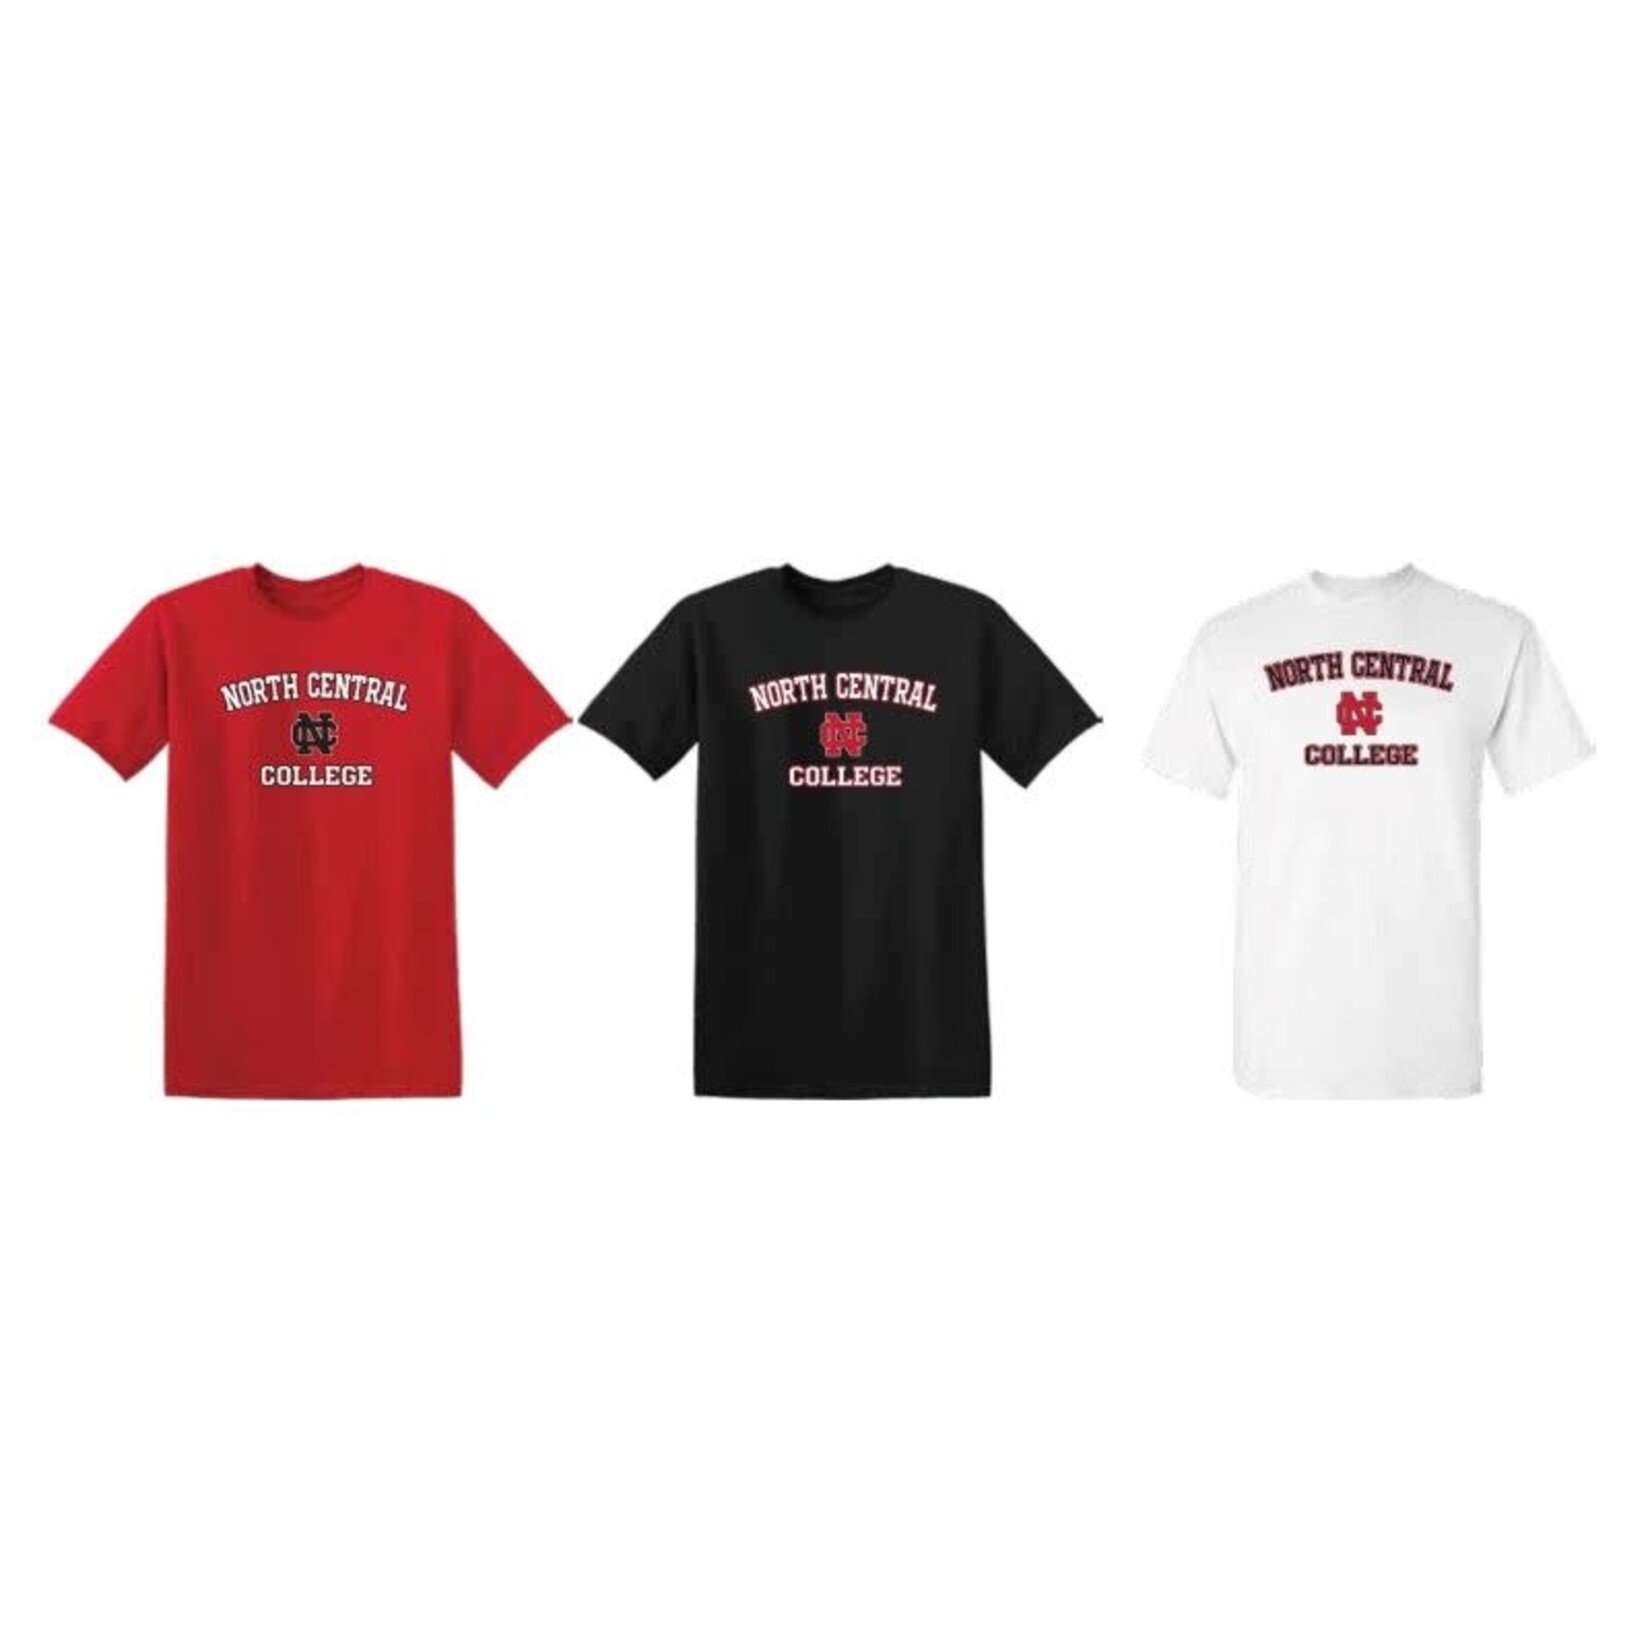 College House North Central College New Summer Tee by College House